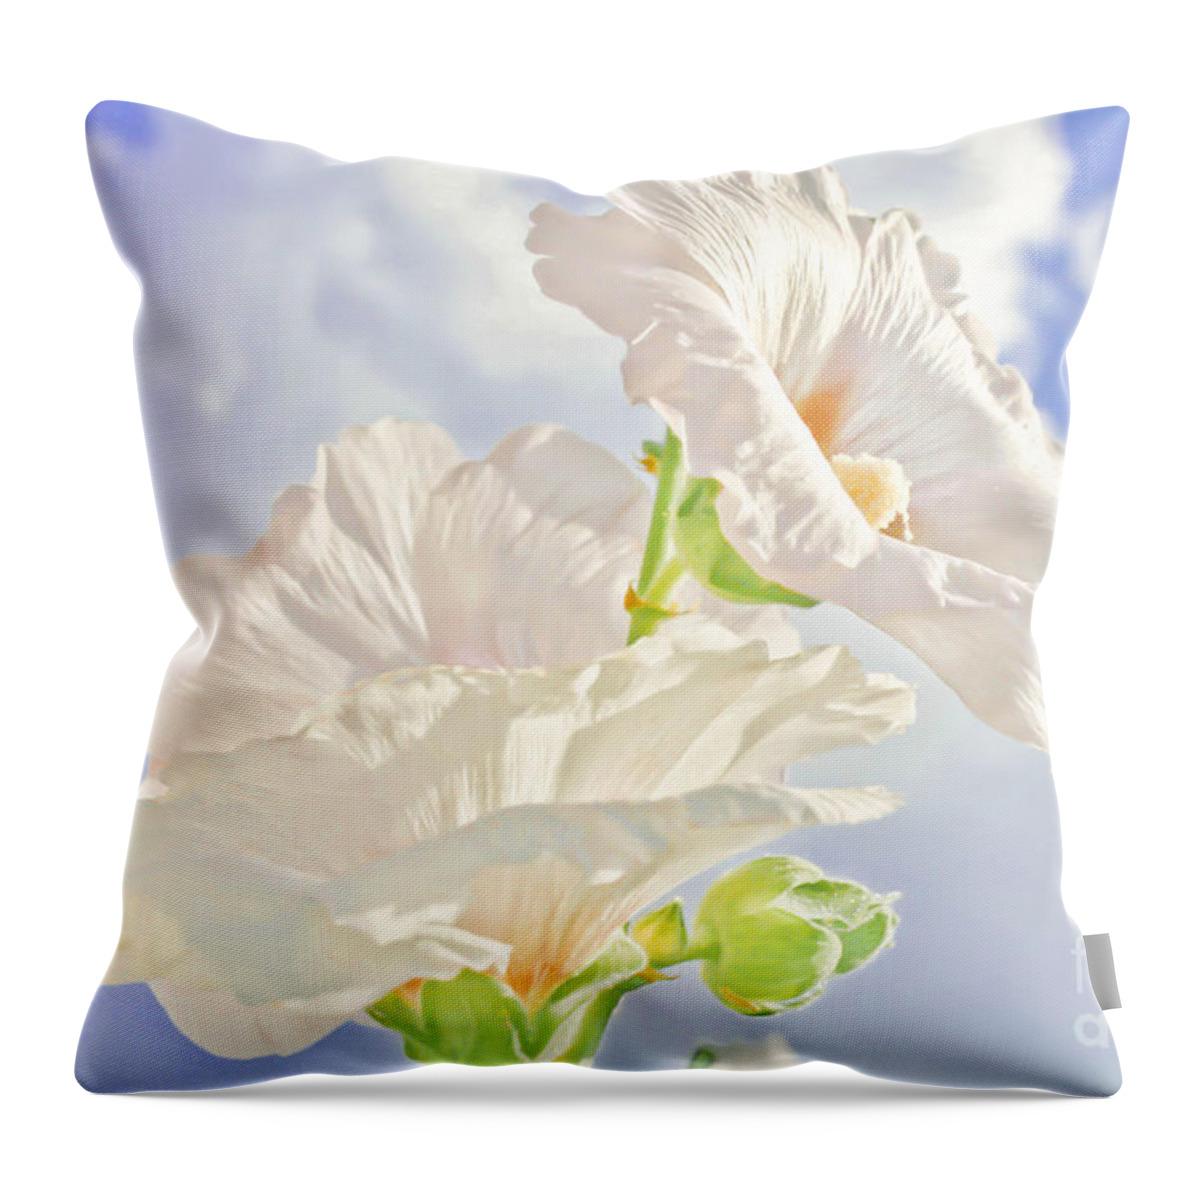 Flowers Throw Pillow featuring the photograph Hollyhocks And Sky by Barbara Dean